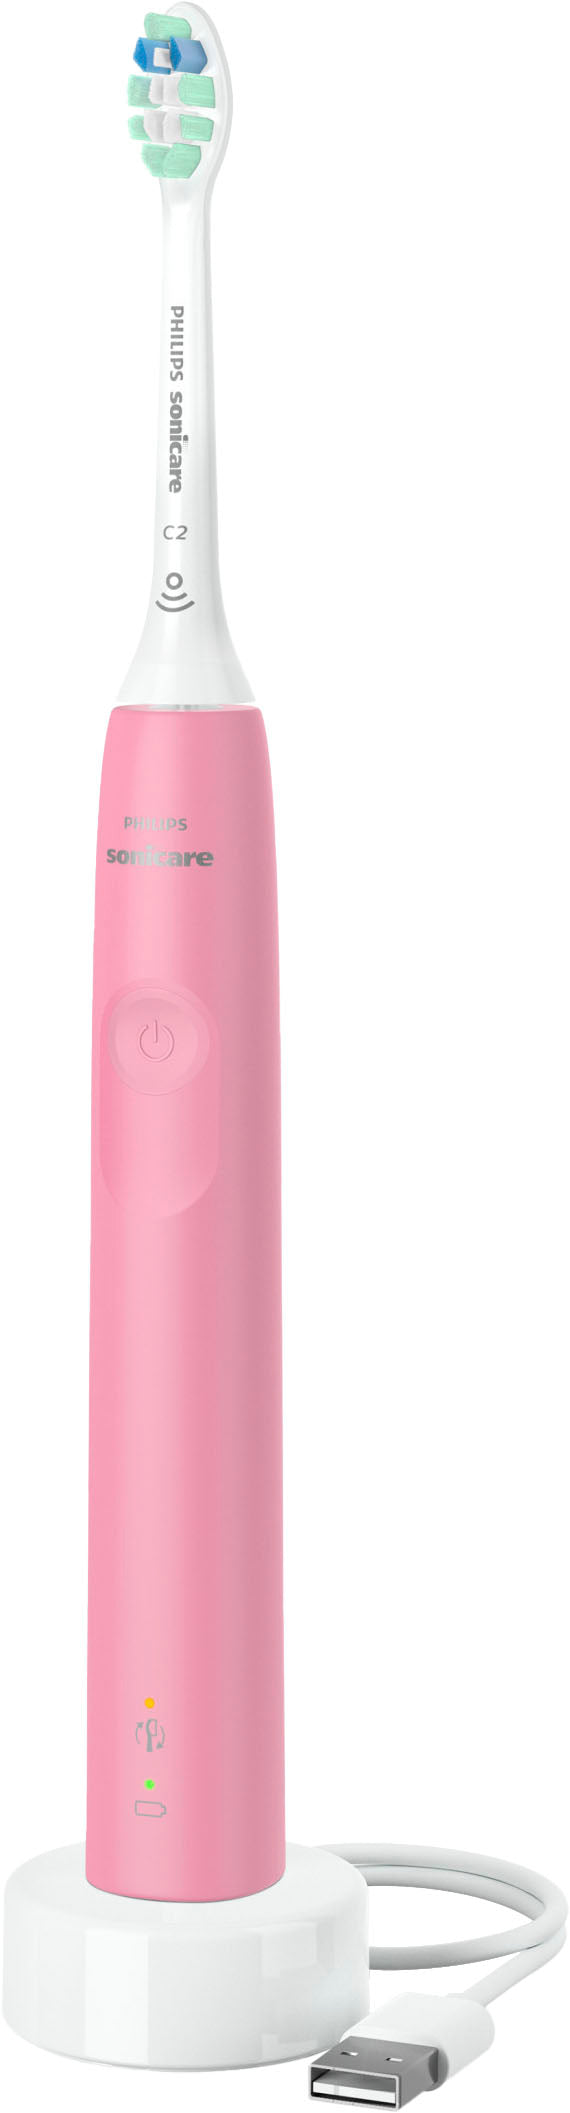 Philips Sonicare 4100 Power Toothbrush - Deep Pink_4